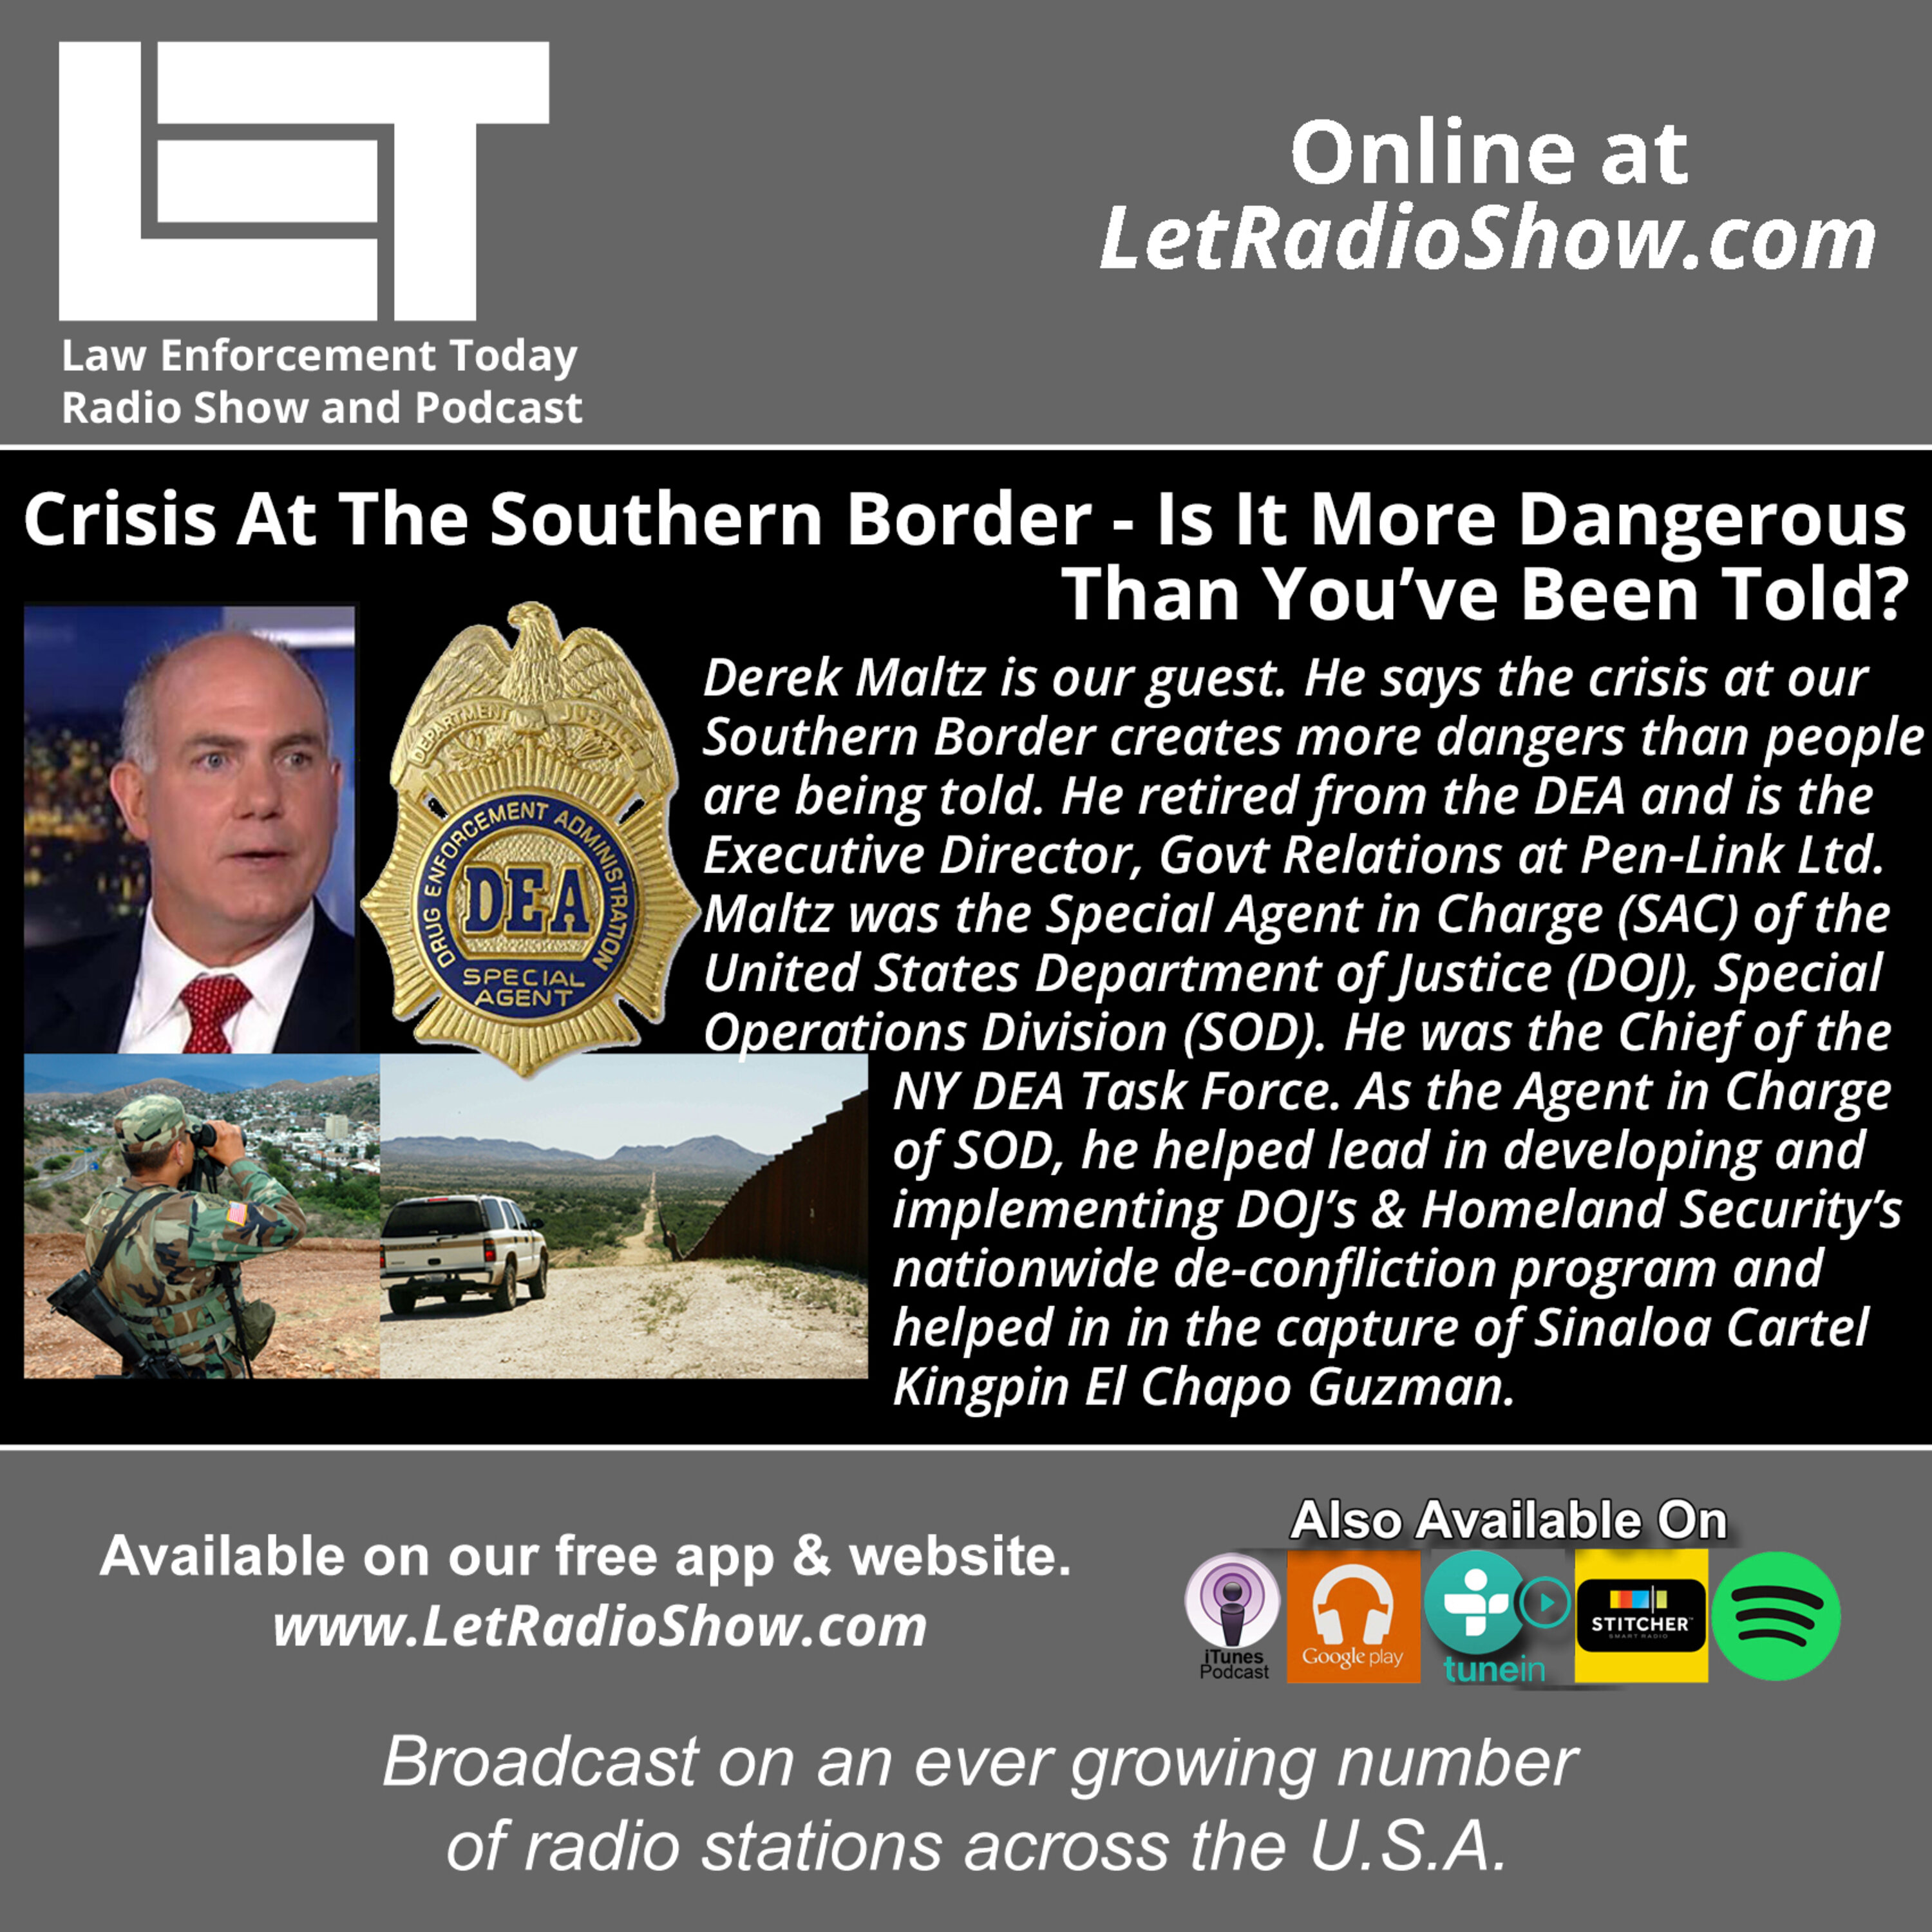 S5E16: Crisis At The Southern Border - Is It More Dangerous Than You’ve Been Told?